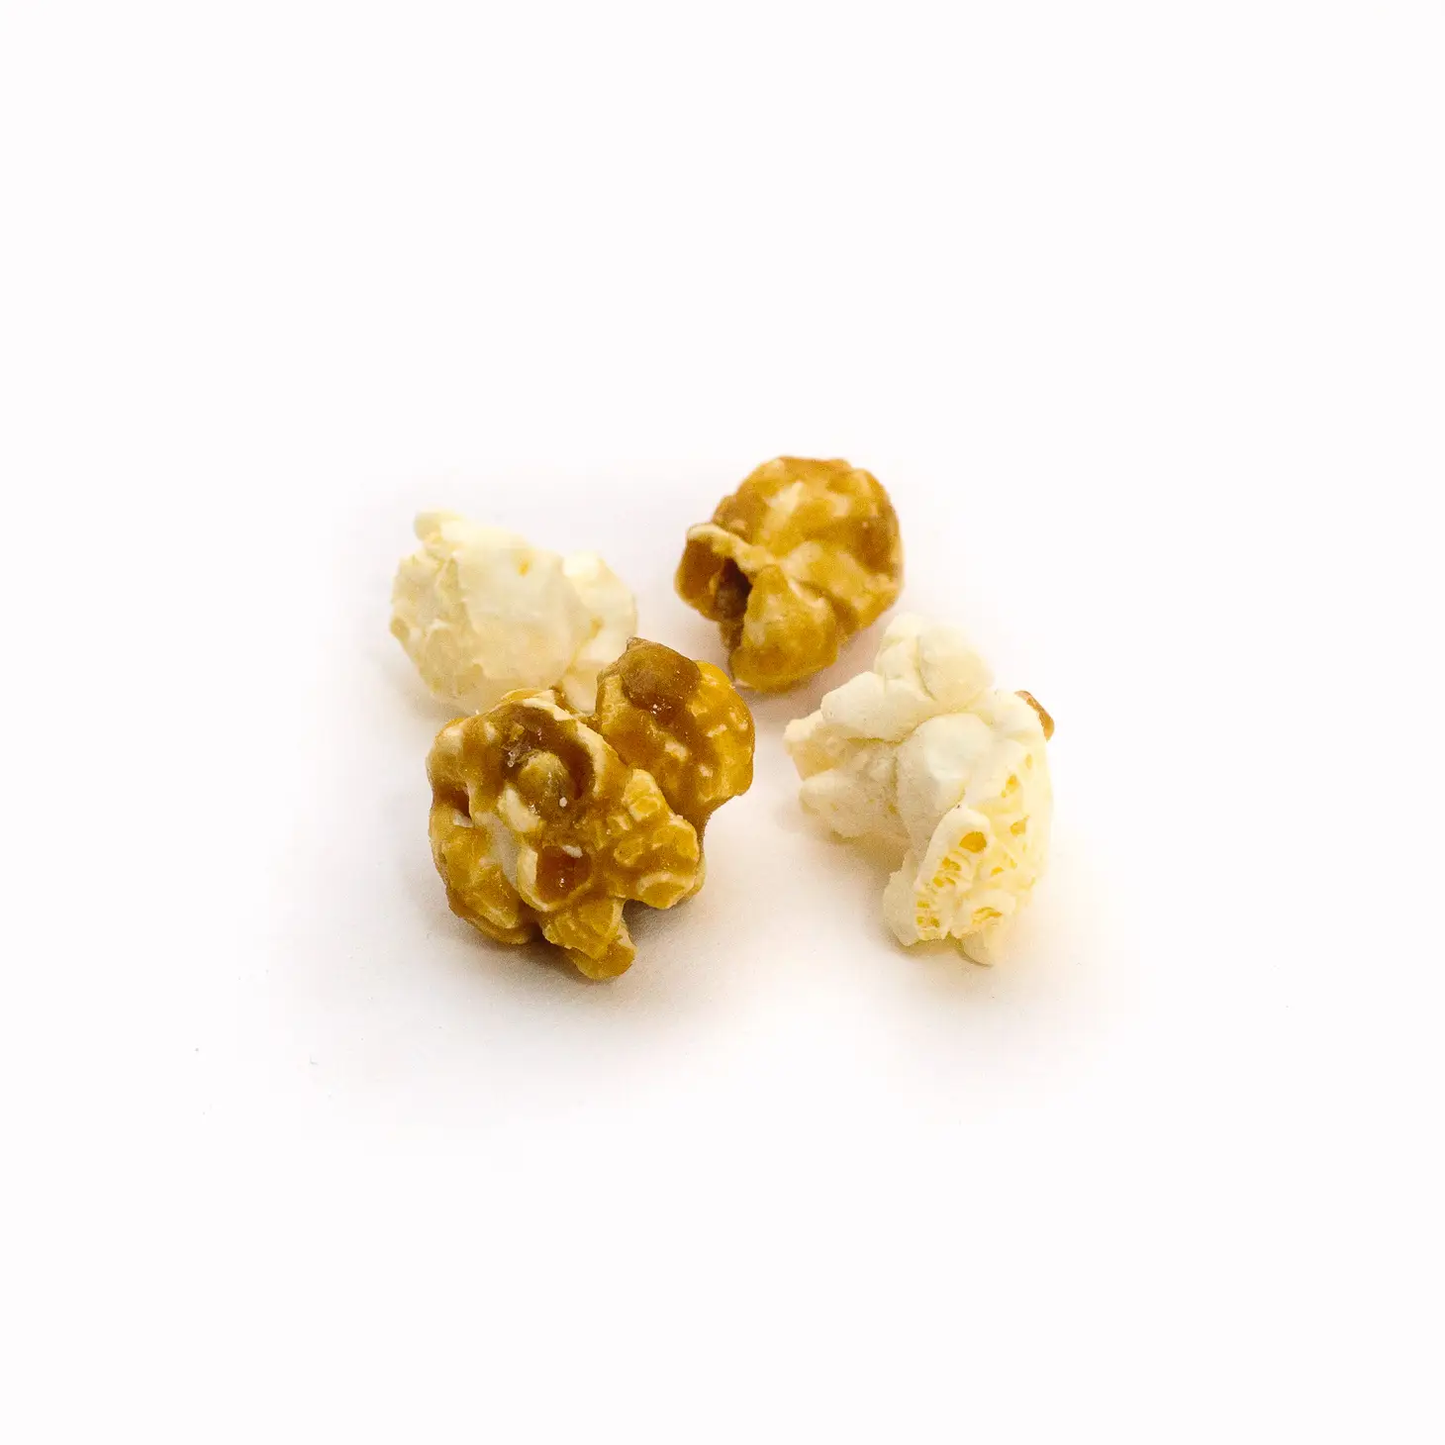 Poppy Handcrafted Popcorn - Market Bag - Asheville Mix, Lee's Summit, MO, Bel Fiore Co. Flower Bar + Boutique